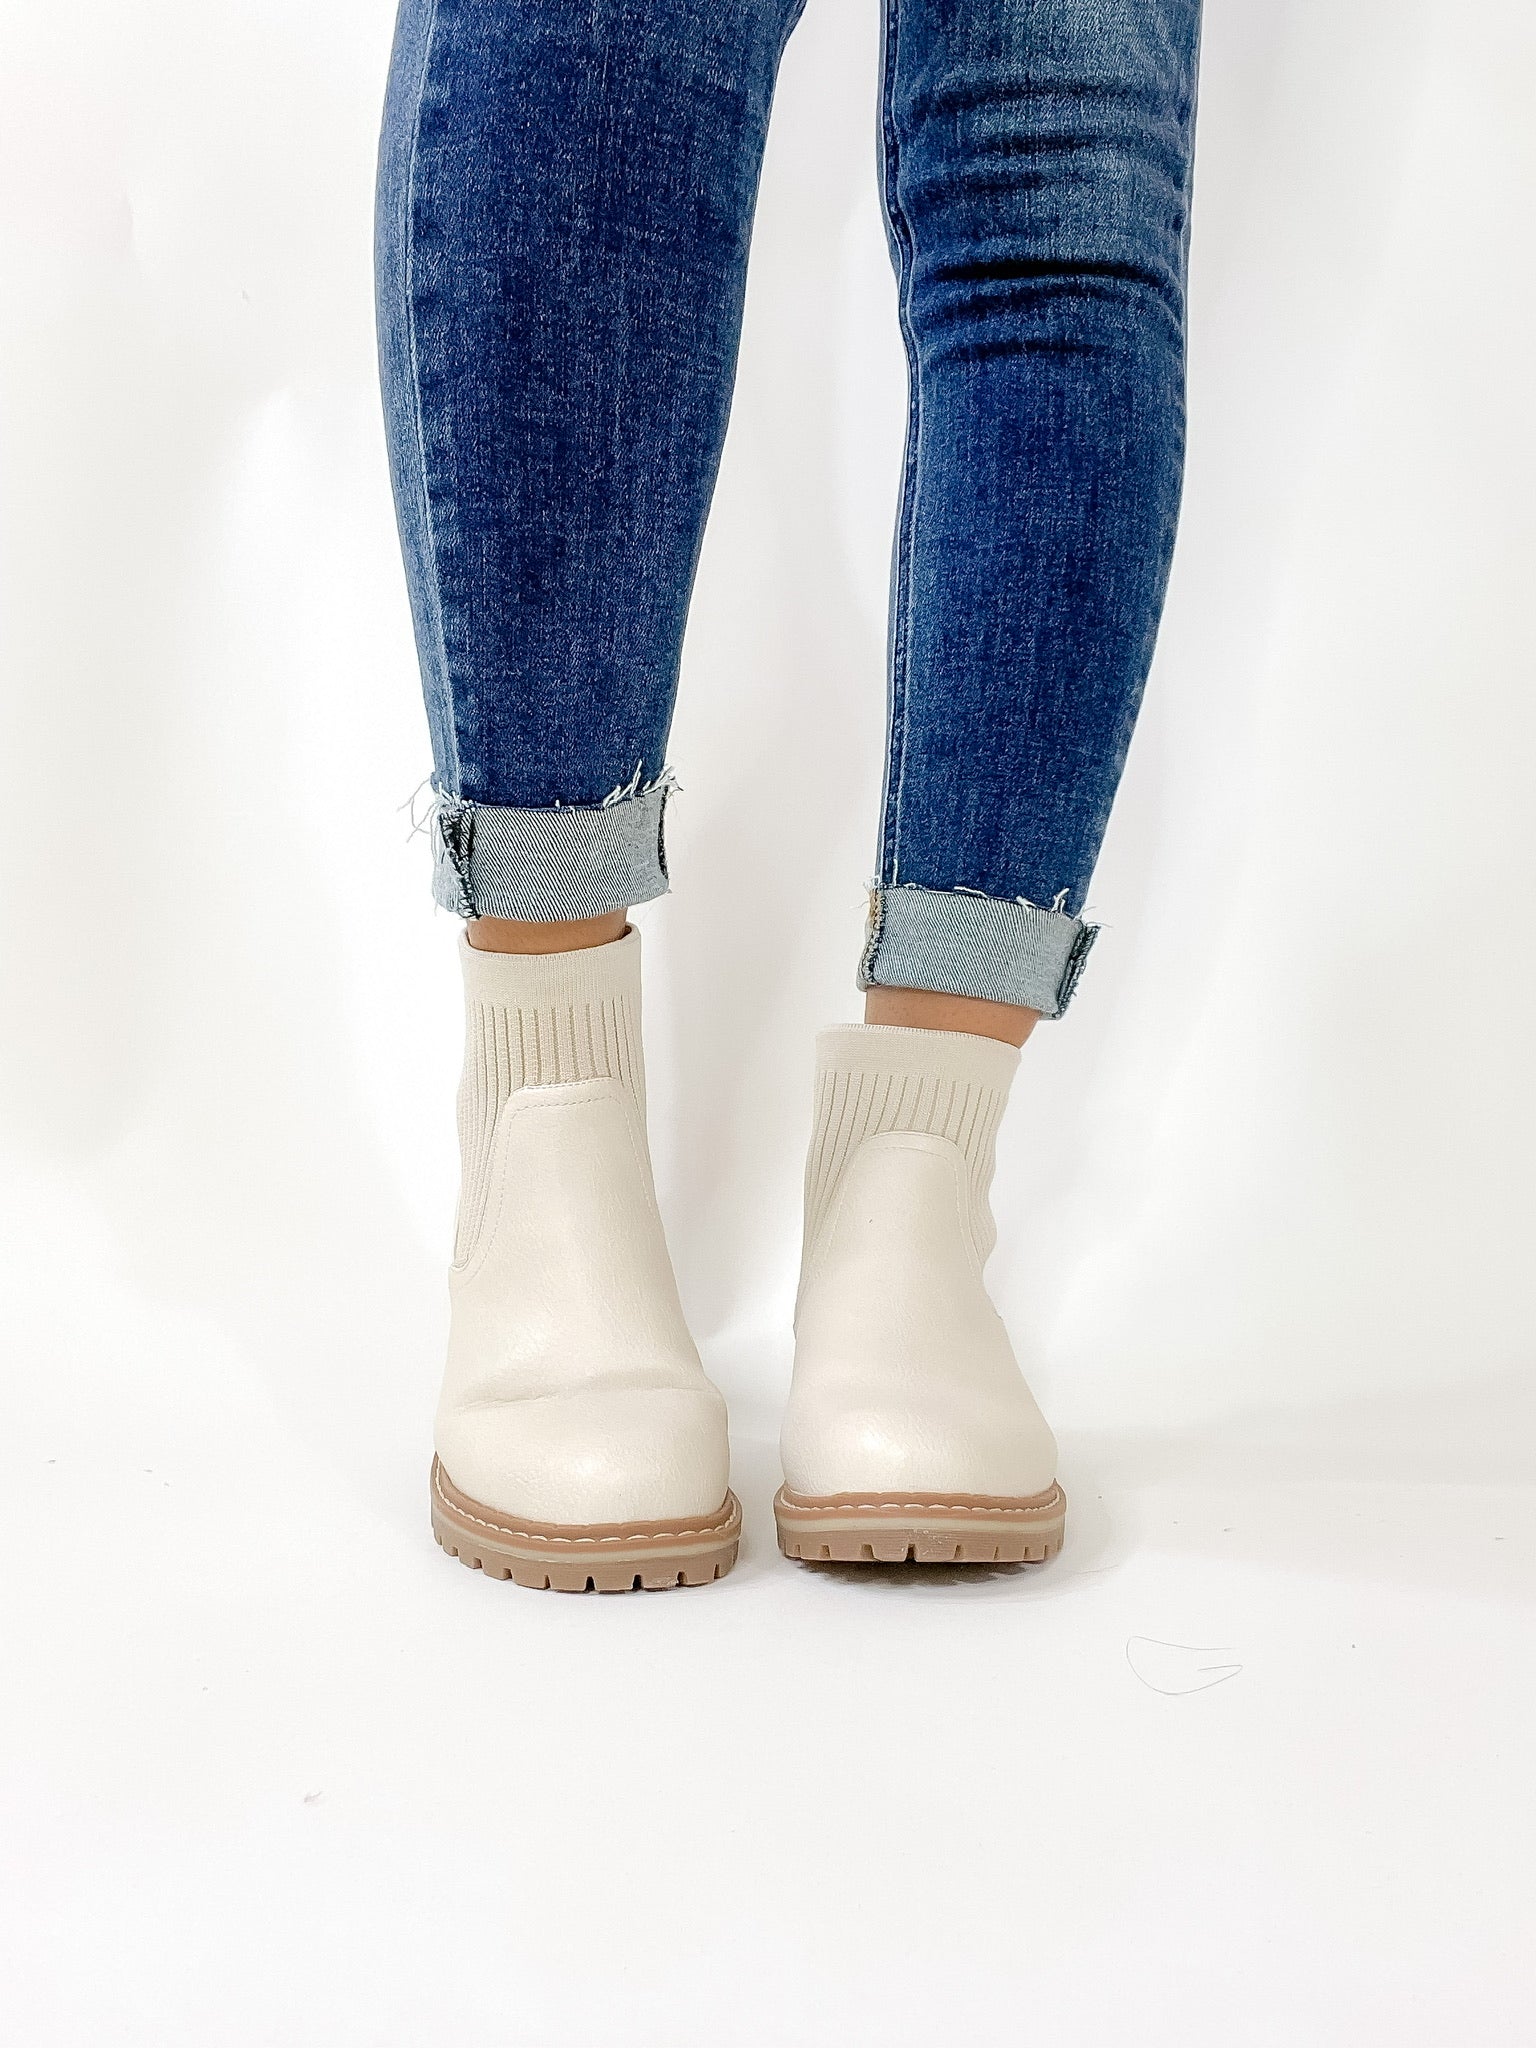 Corky's | Cabin Fever Slip On Booties in Cream - Giddy Up Glamour Boutique